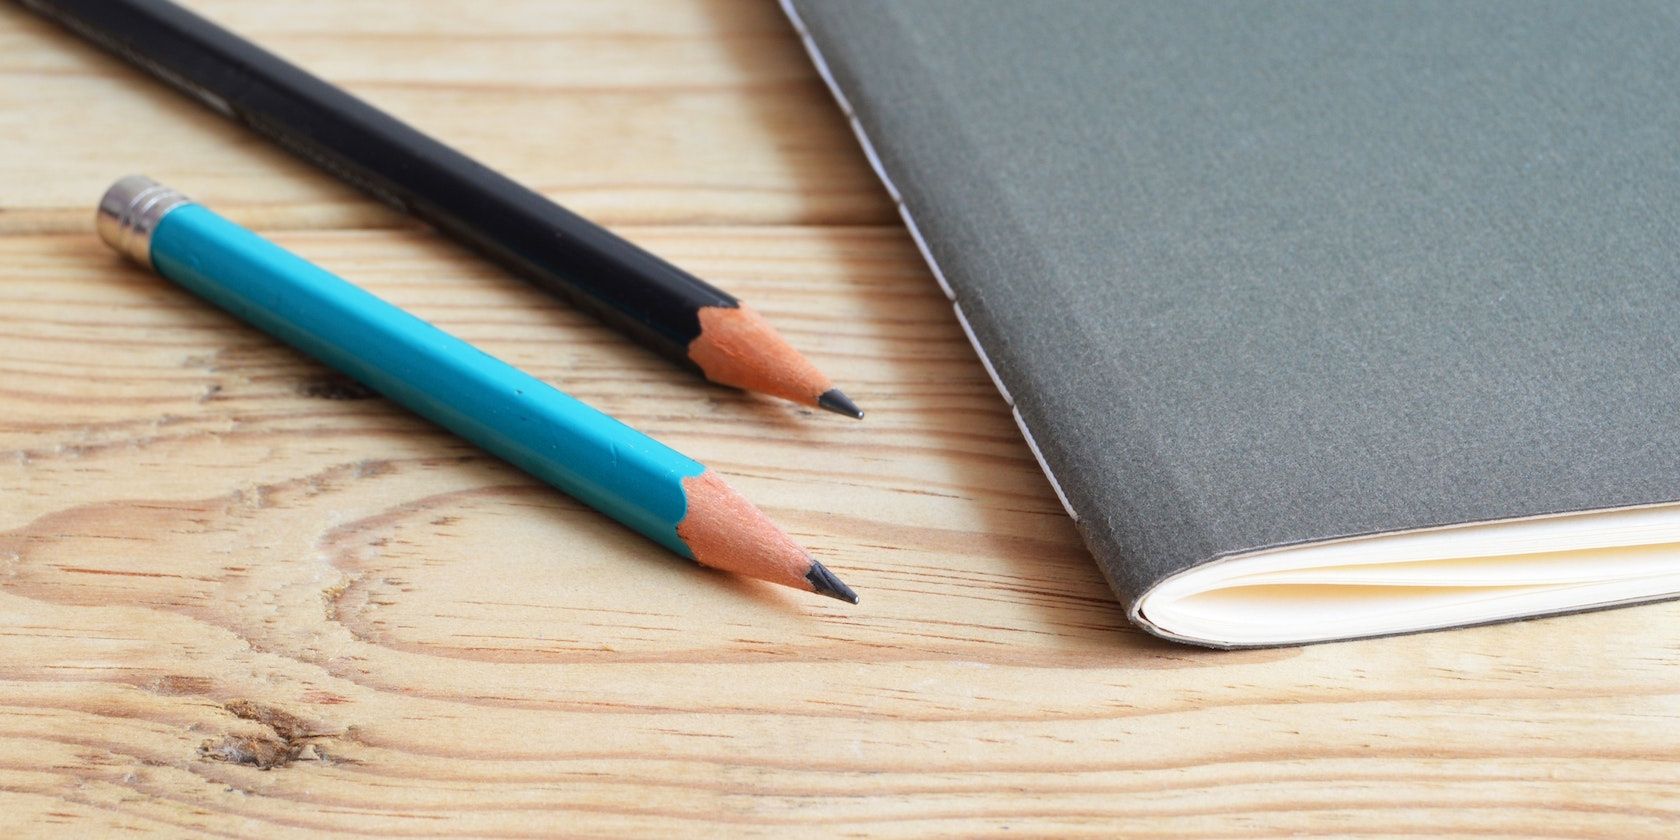 Pencils besides notebook on wooden table